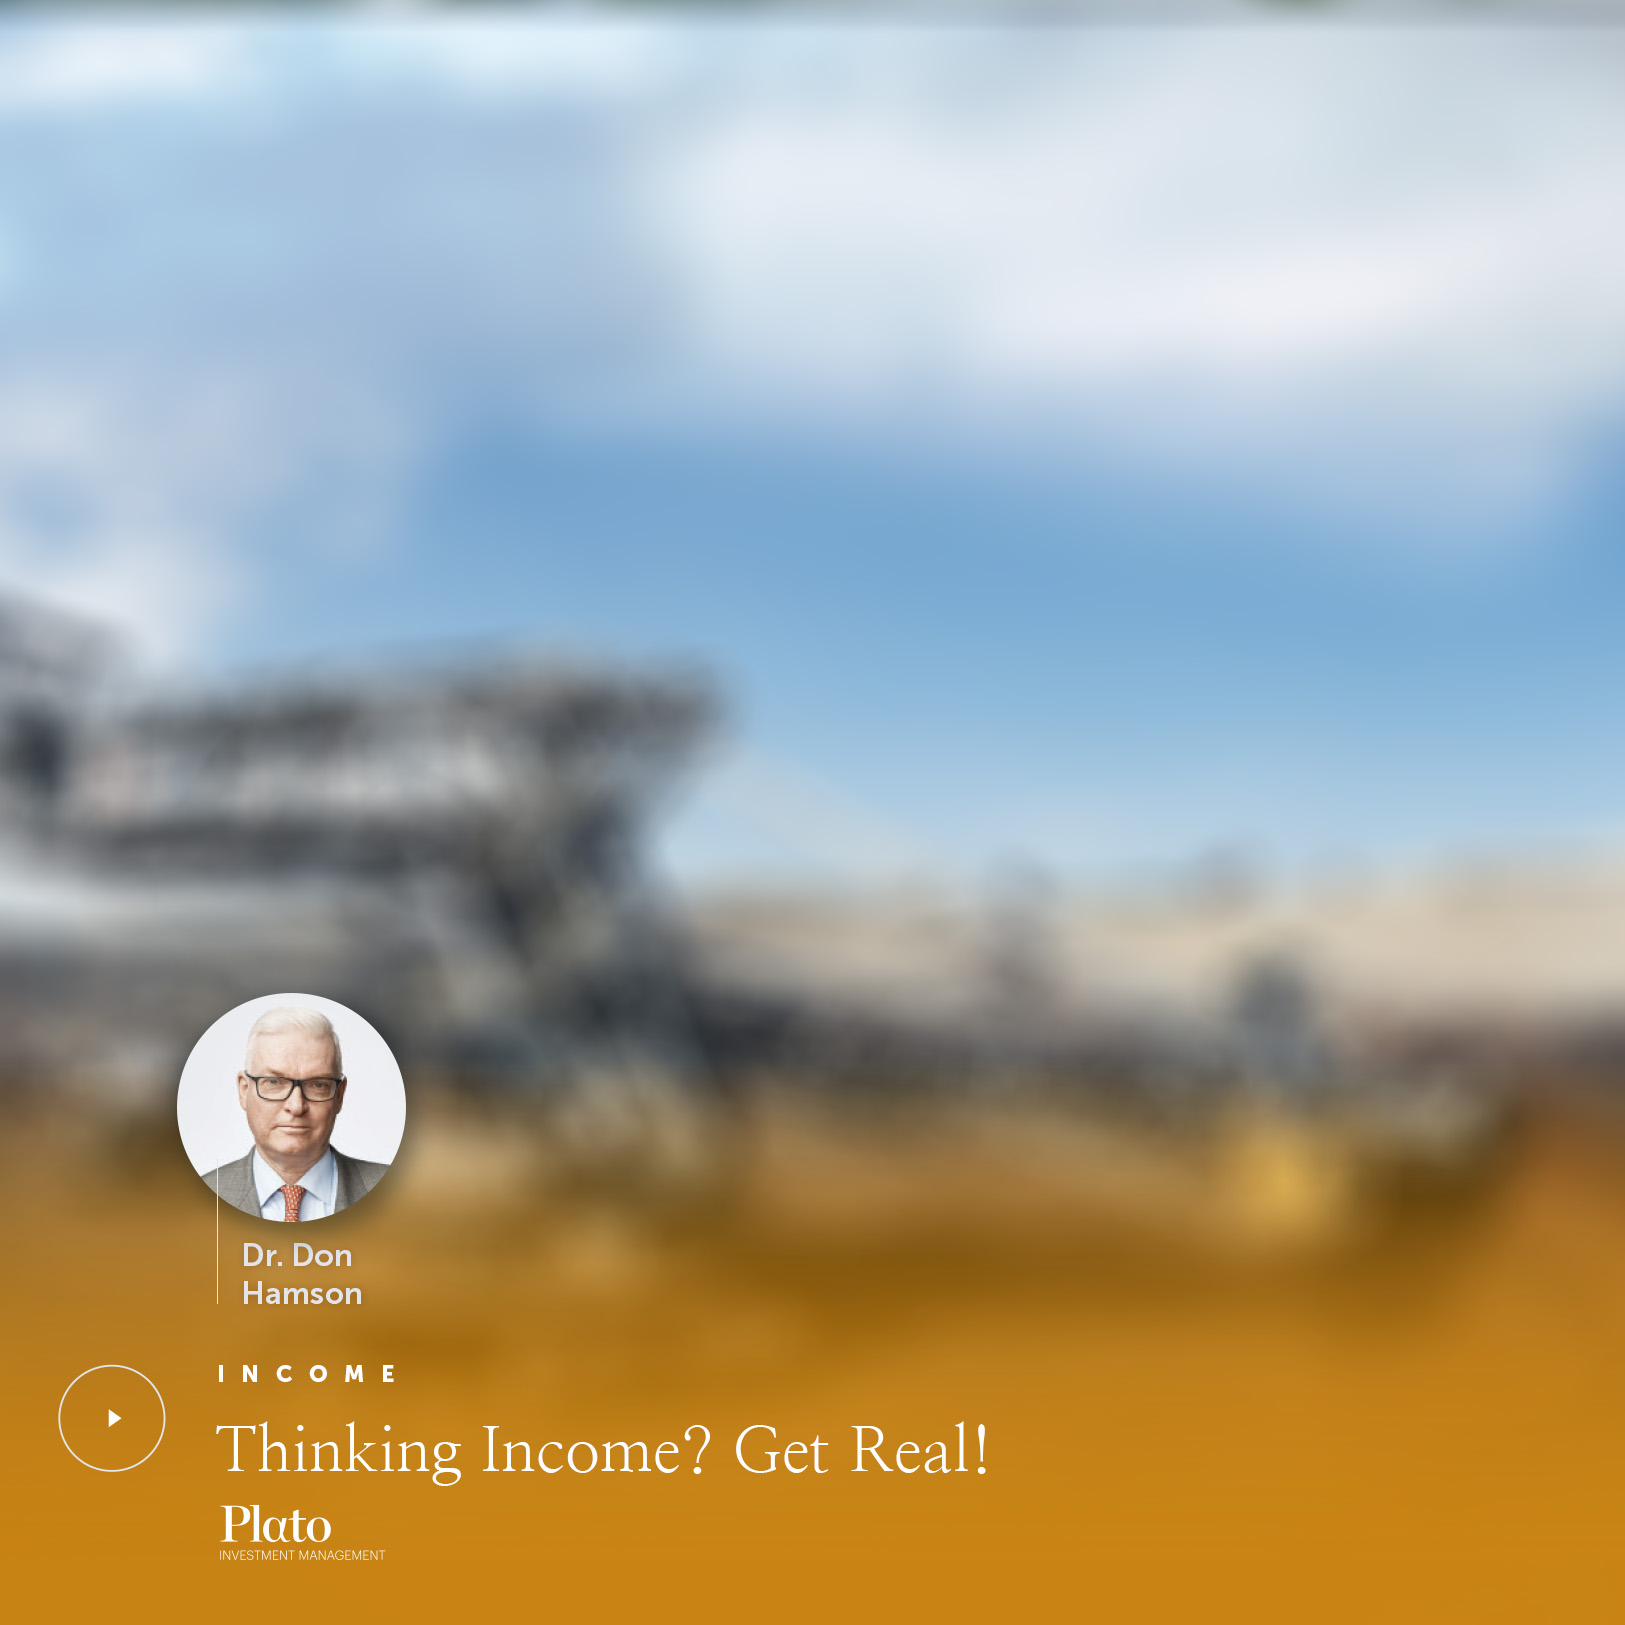 Thinking Income? Get Real!